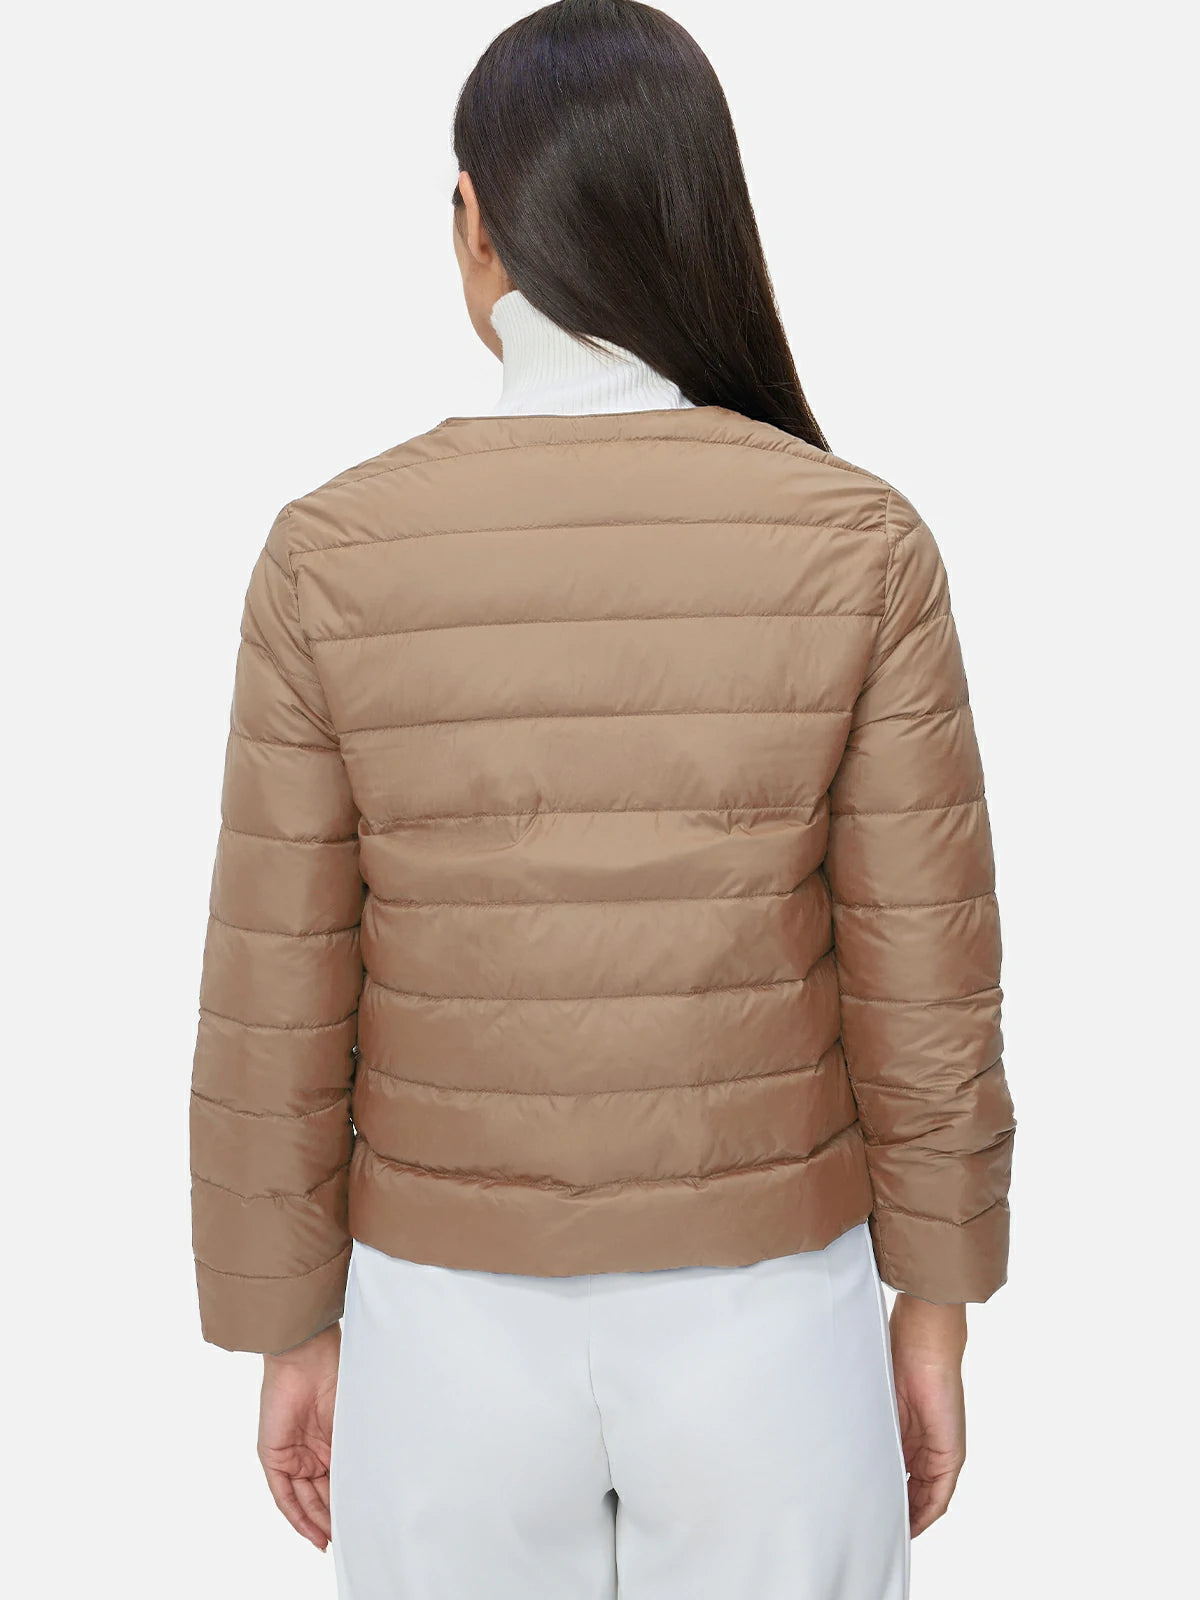 (Stylish round-neck goose down jacket with a lightweight and warm design